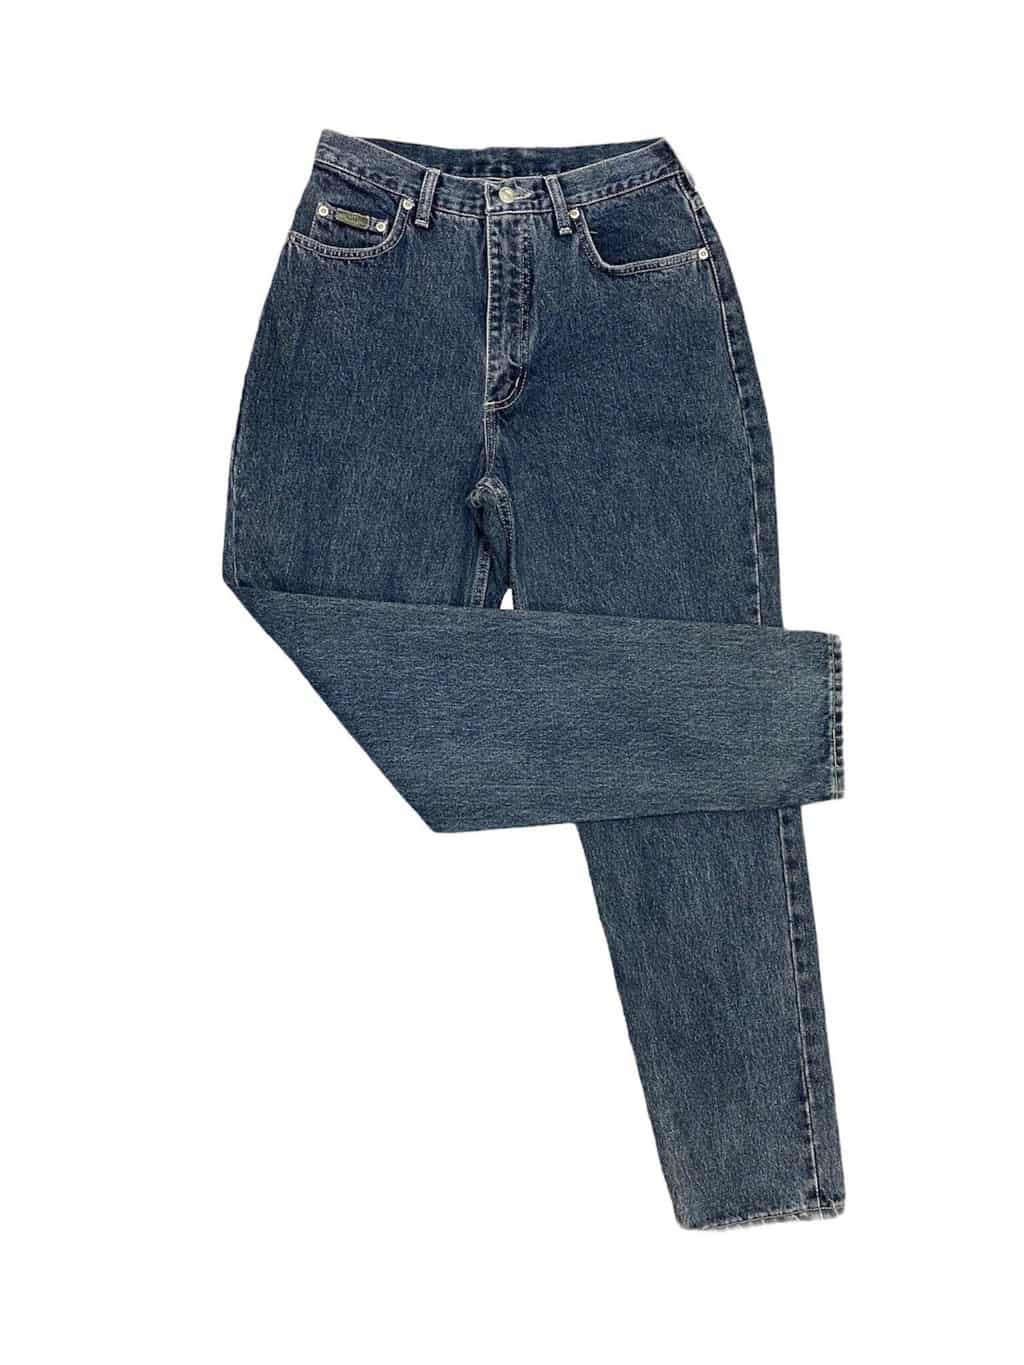 80s vintage womens Wrangler 'Lucille' mom jeans in dark grey / blue, made  in the UK - W28 x L31 - St Cyr Vintage